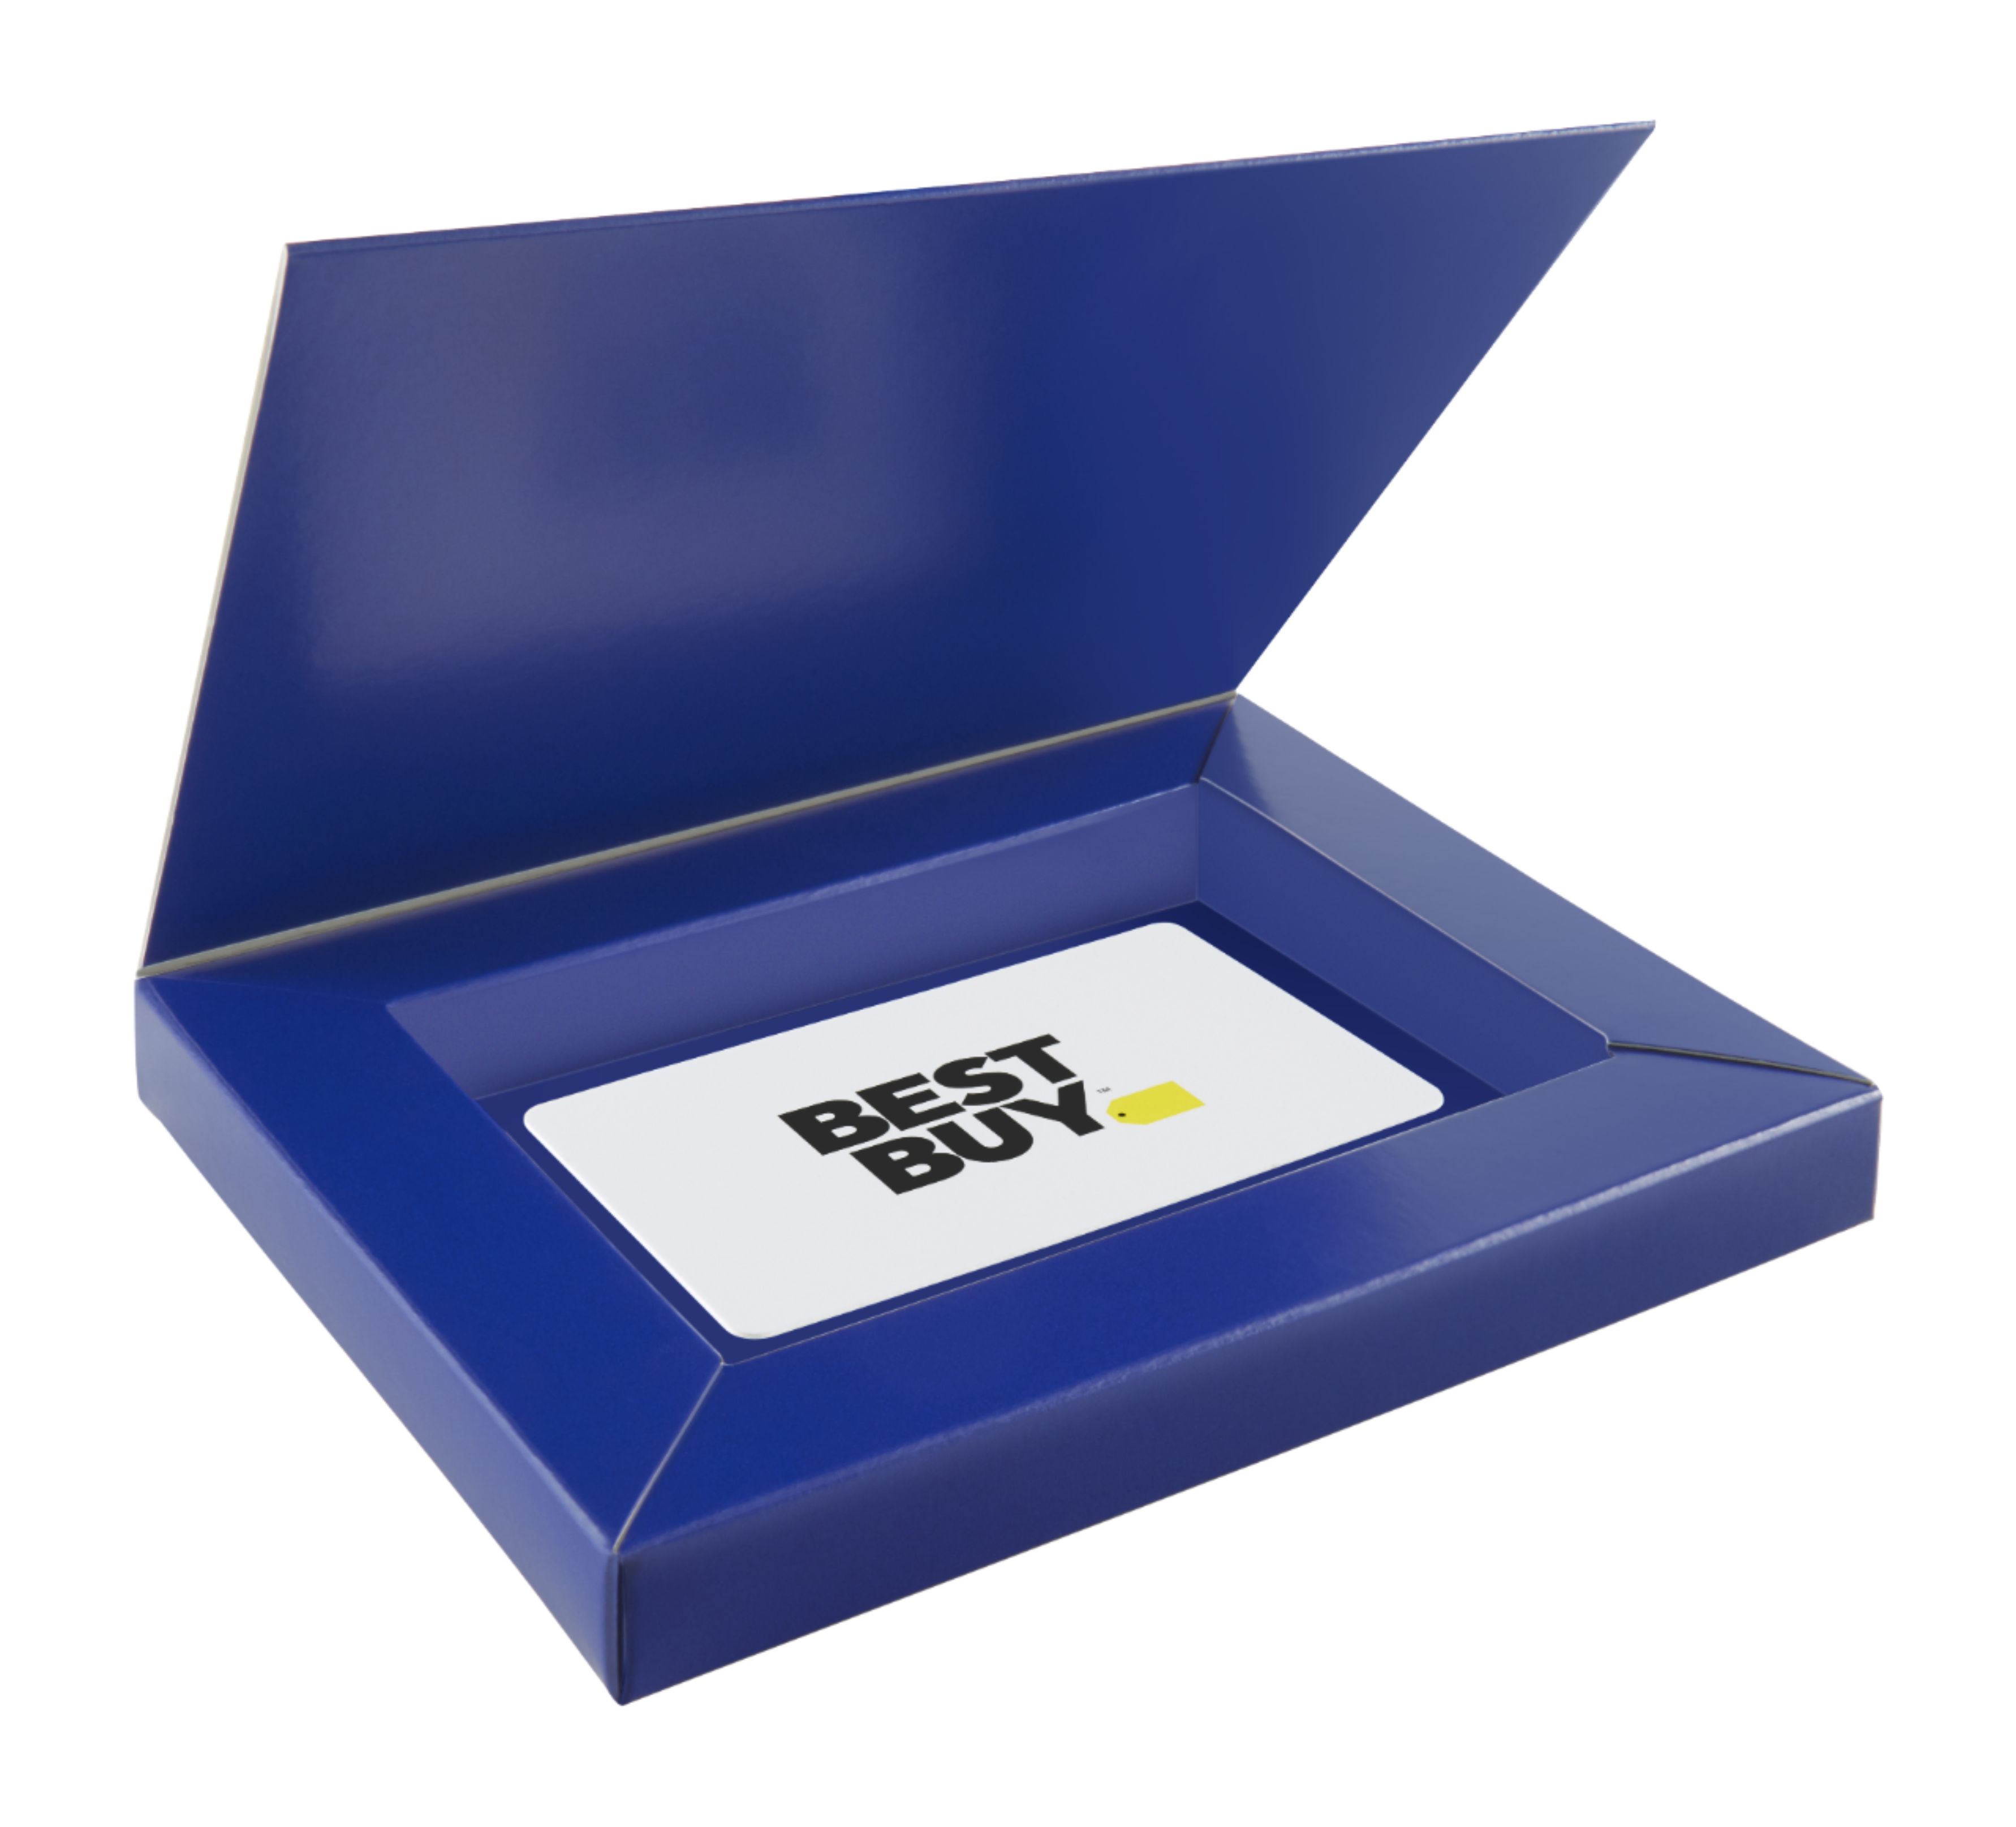 Best Buy® - $100 Best Buy gift card with gift box